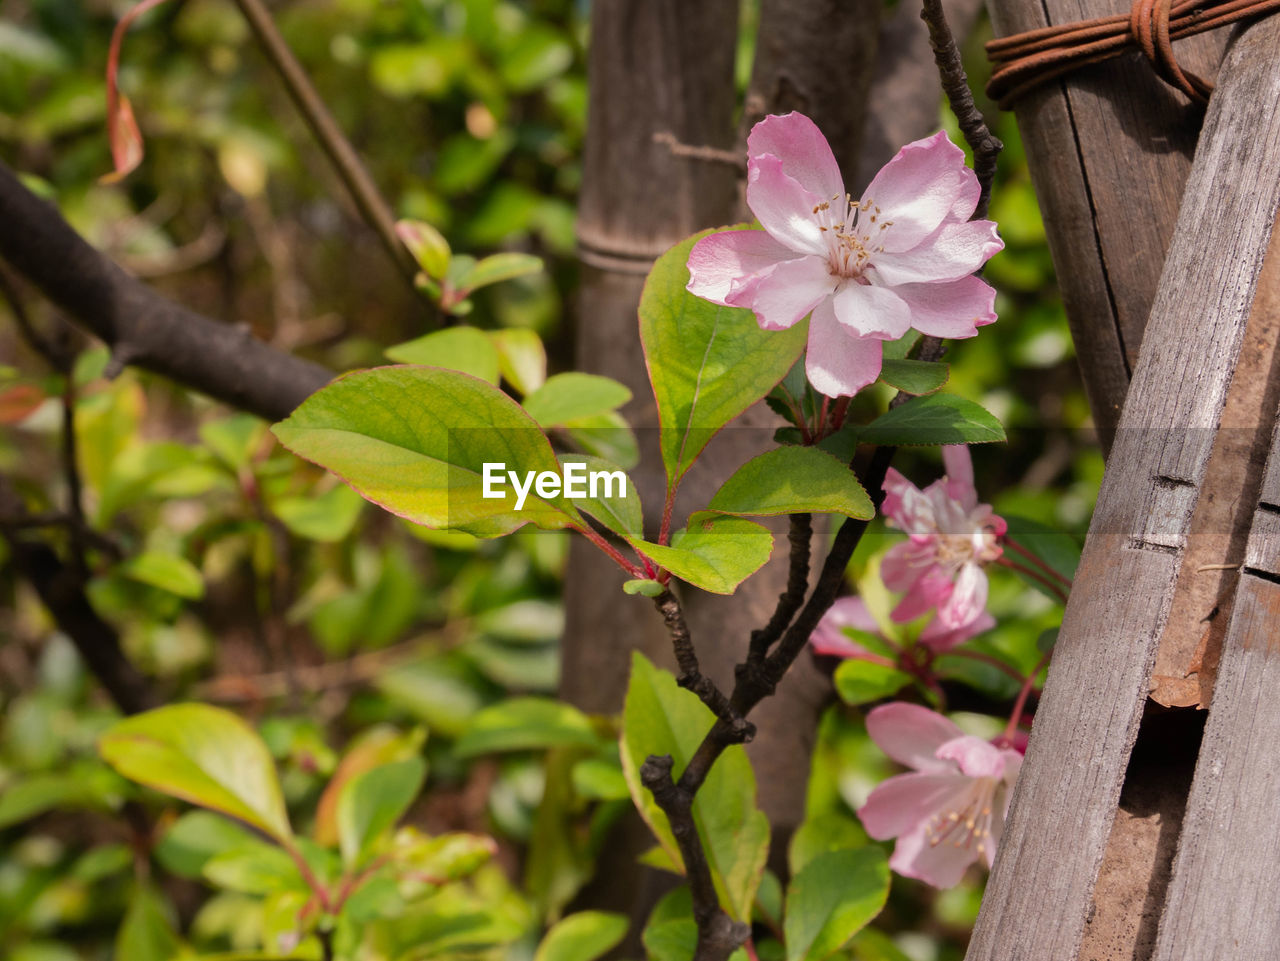 CLOSE-UP OF PINK FLOWERING PLANT WITH WOODEN LEAVES